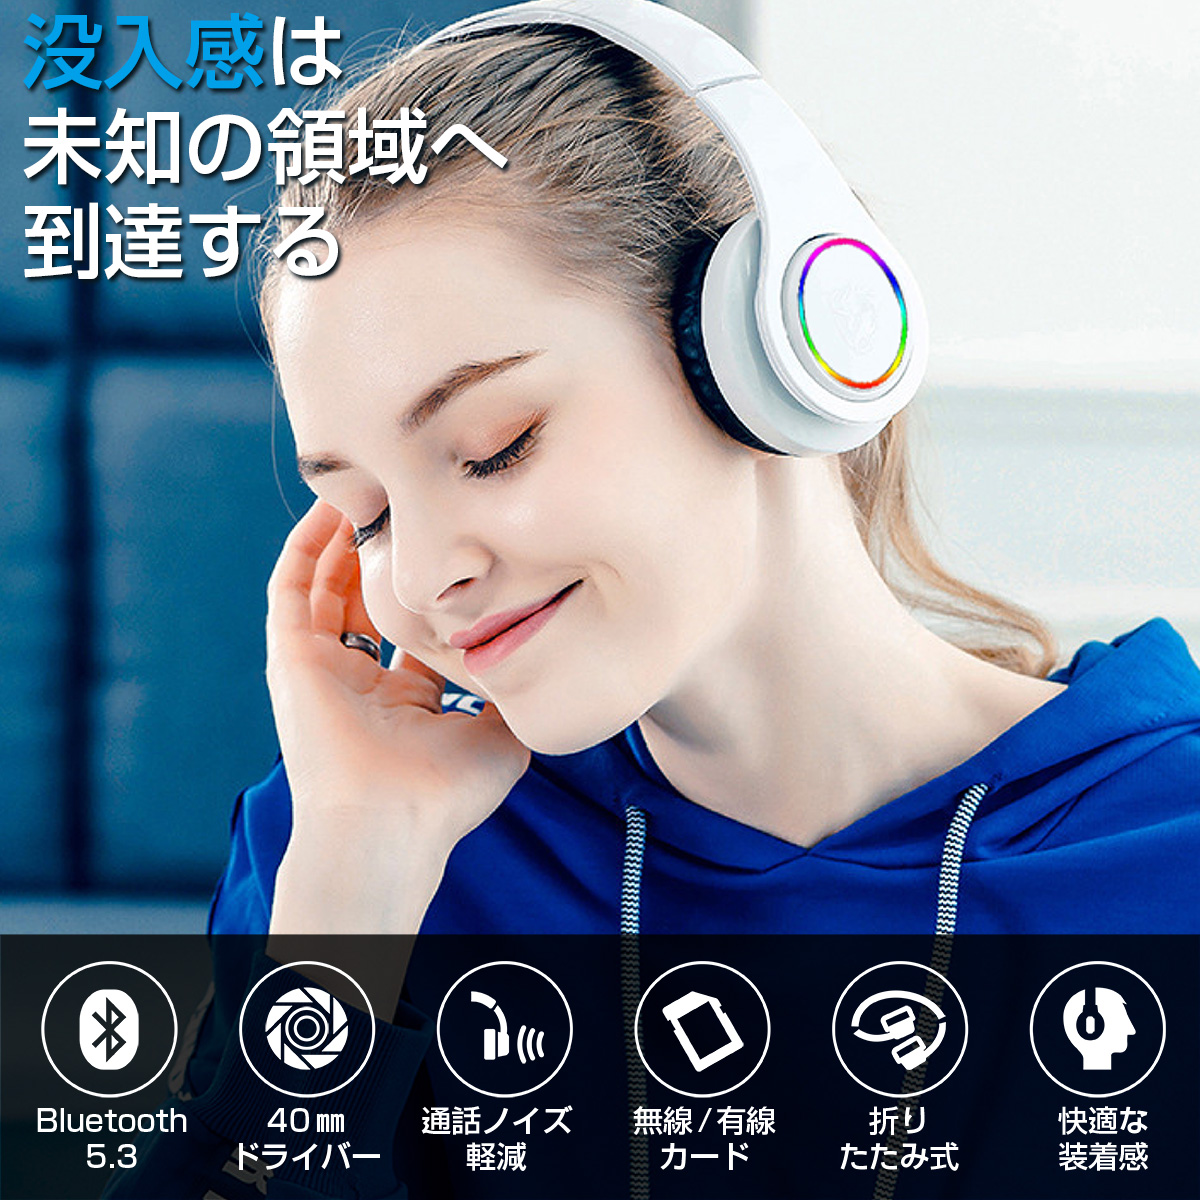  wireless headphone bluetooth 5.3 headphone wireless wireless wire USB SD card noise cancel ring Mike built-in folding type hands free sound leak prevention 